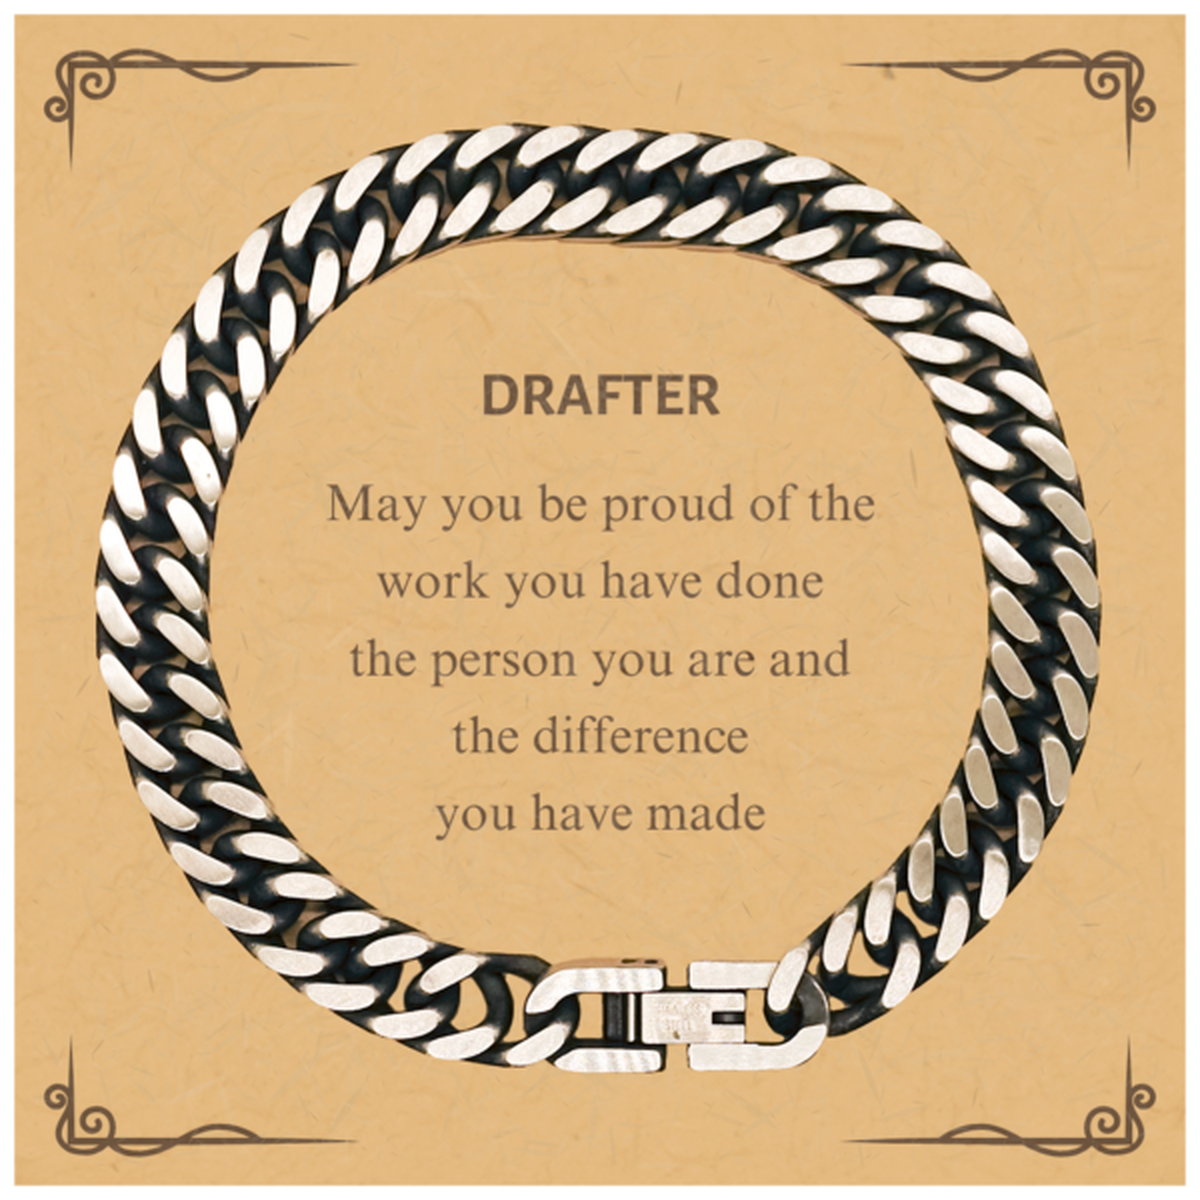 Drafter May you be proud of the work you have done, Retirement Drafter Cuban Link Chain Bracelet for Colleague Appreciation Gifts Amazing for Drafter